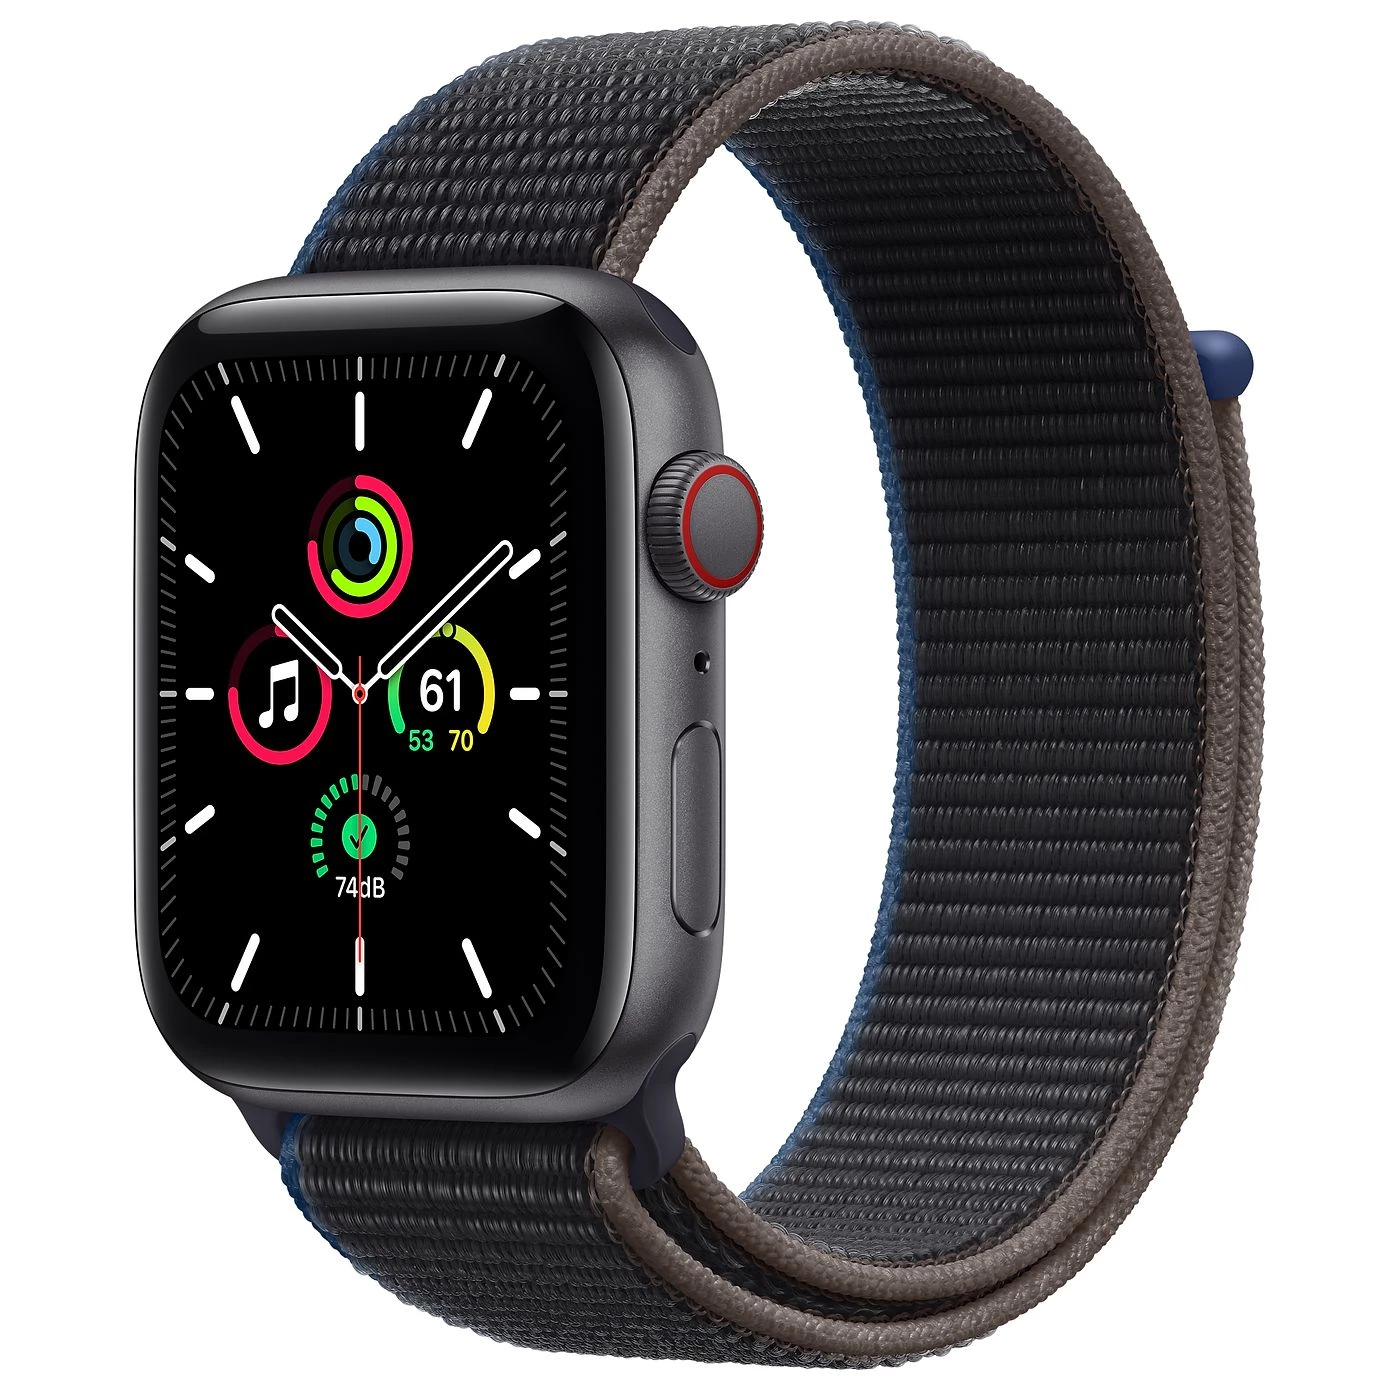 Apple Watch SE GPS + Cellular 44mm Space Gray Aluminum Case with Charcoal Sport Loop (MYEU2, MYF12)